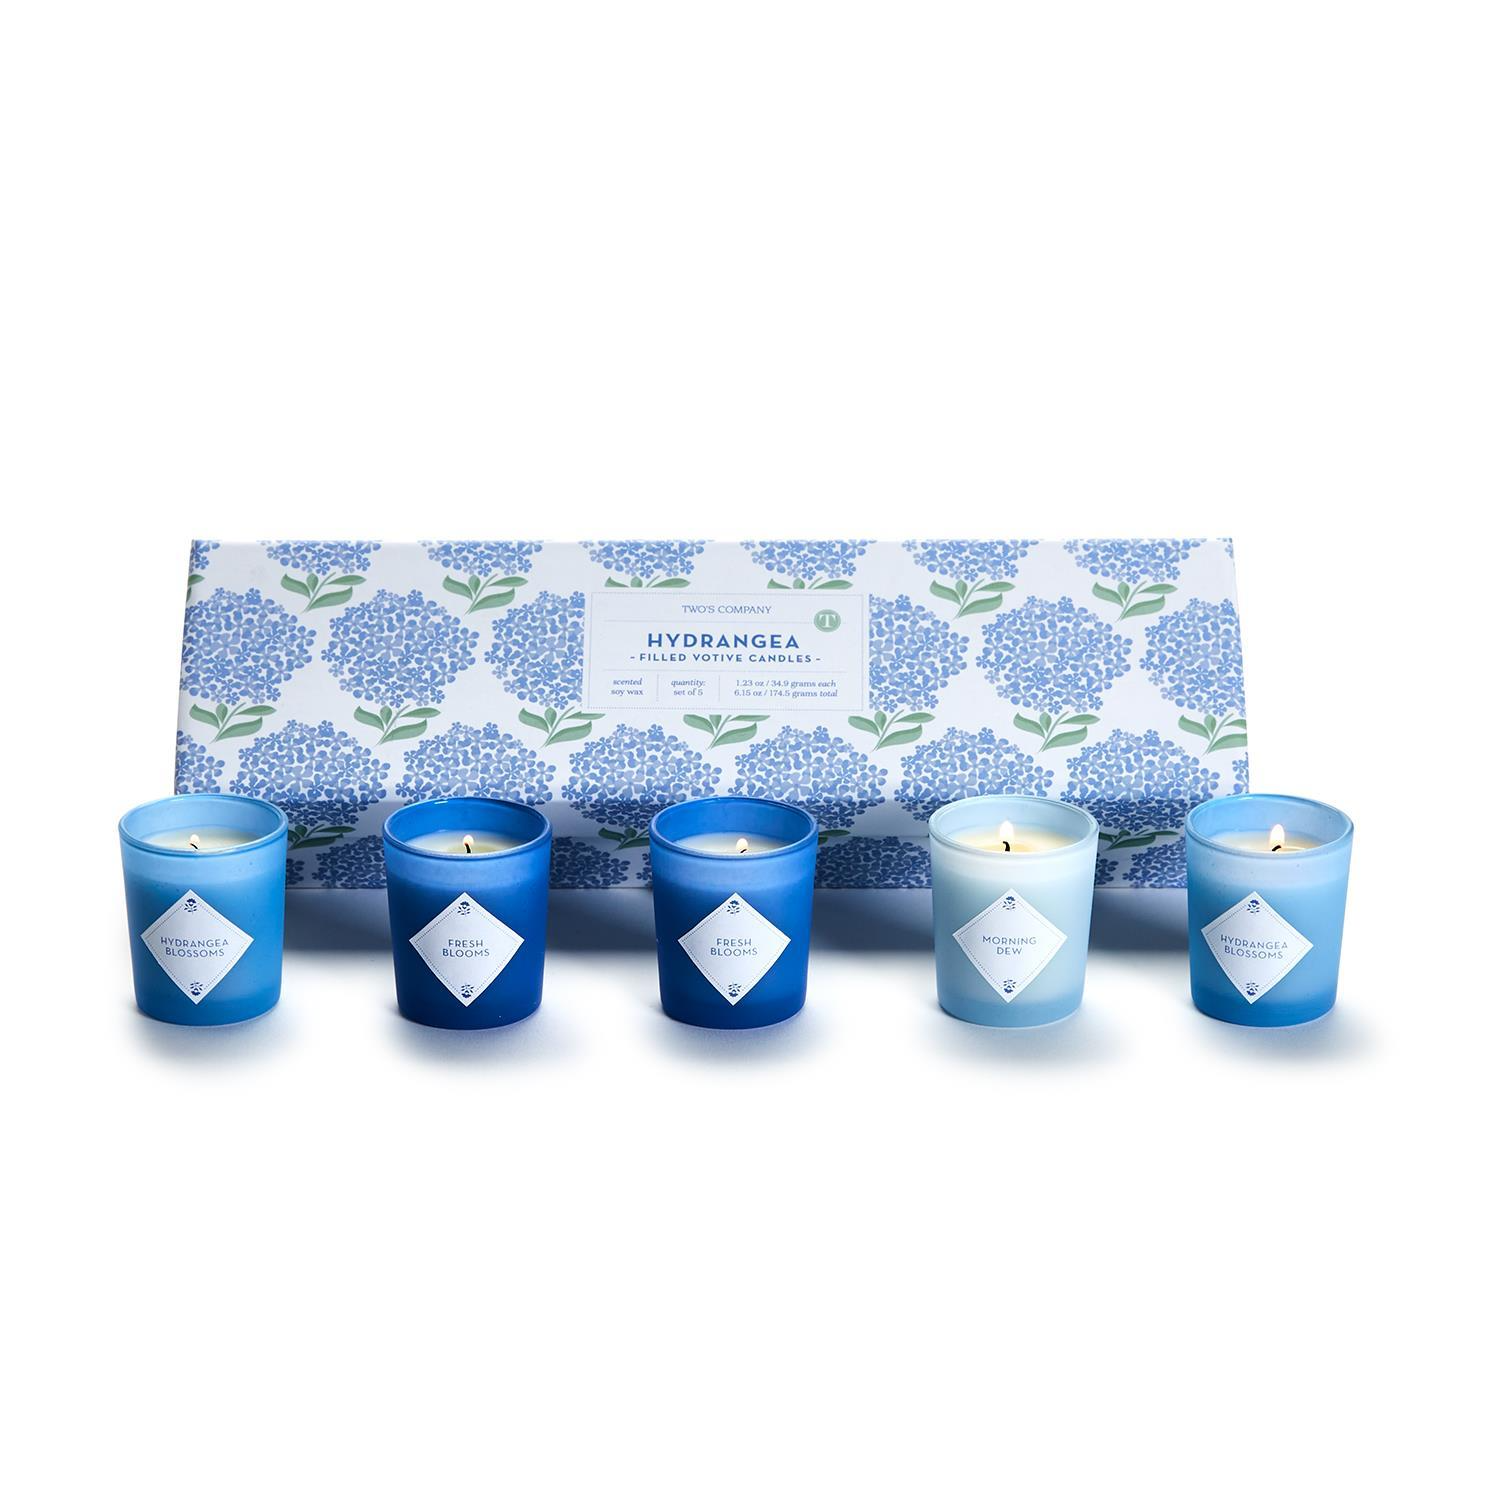 Hydrangea Scented Votive Candles - Boxed Set of 5 - Mellow Monkey